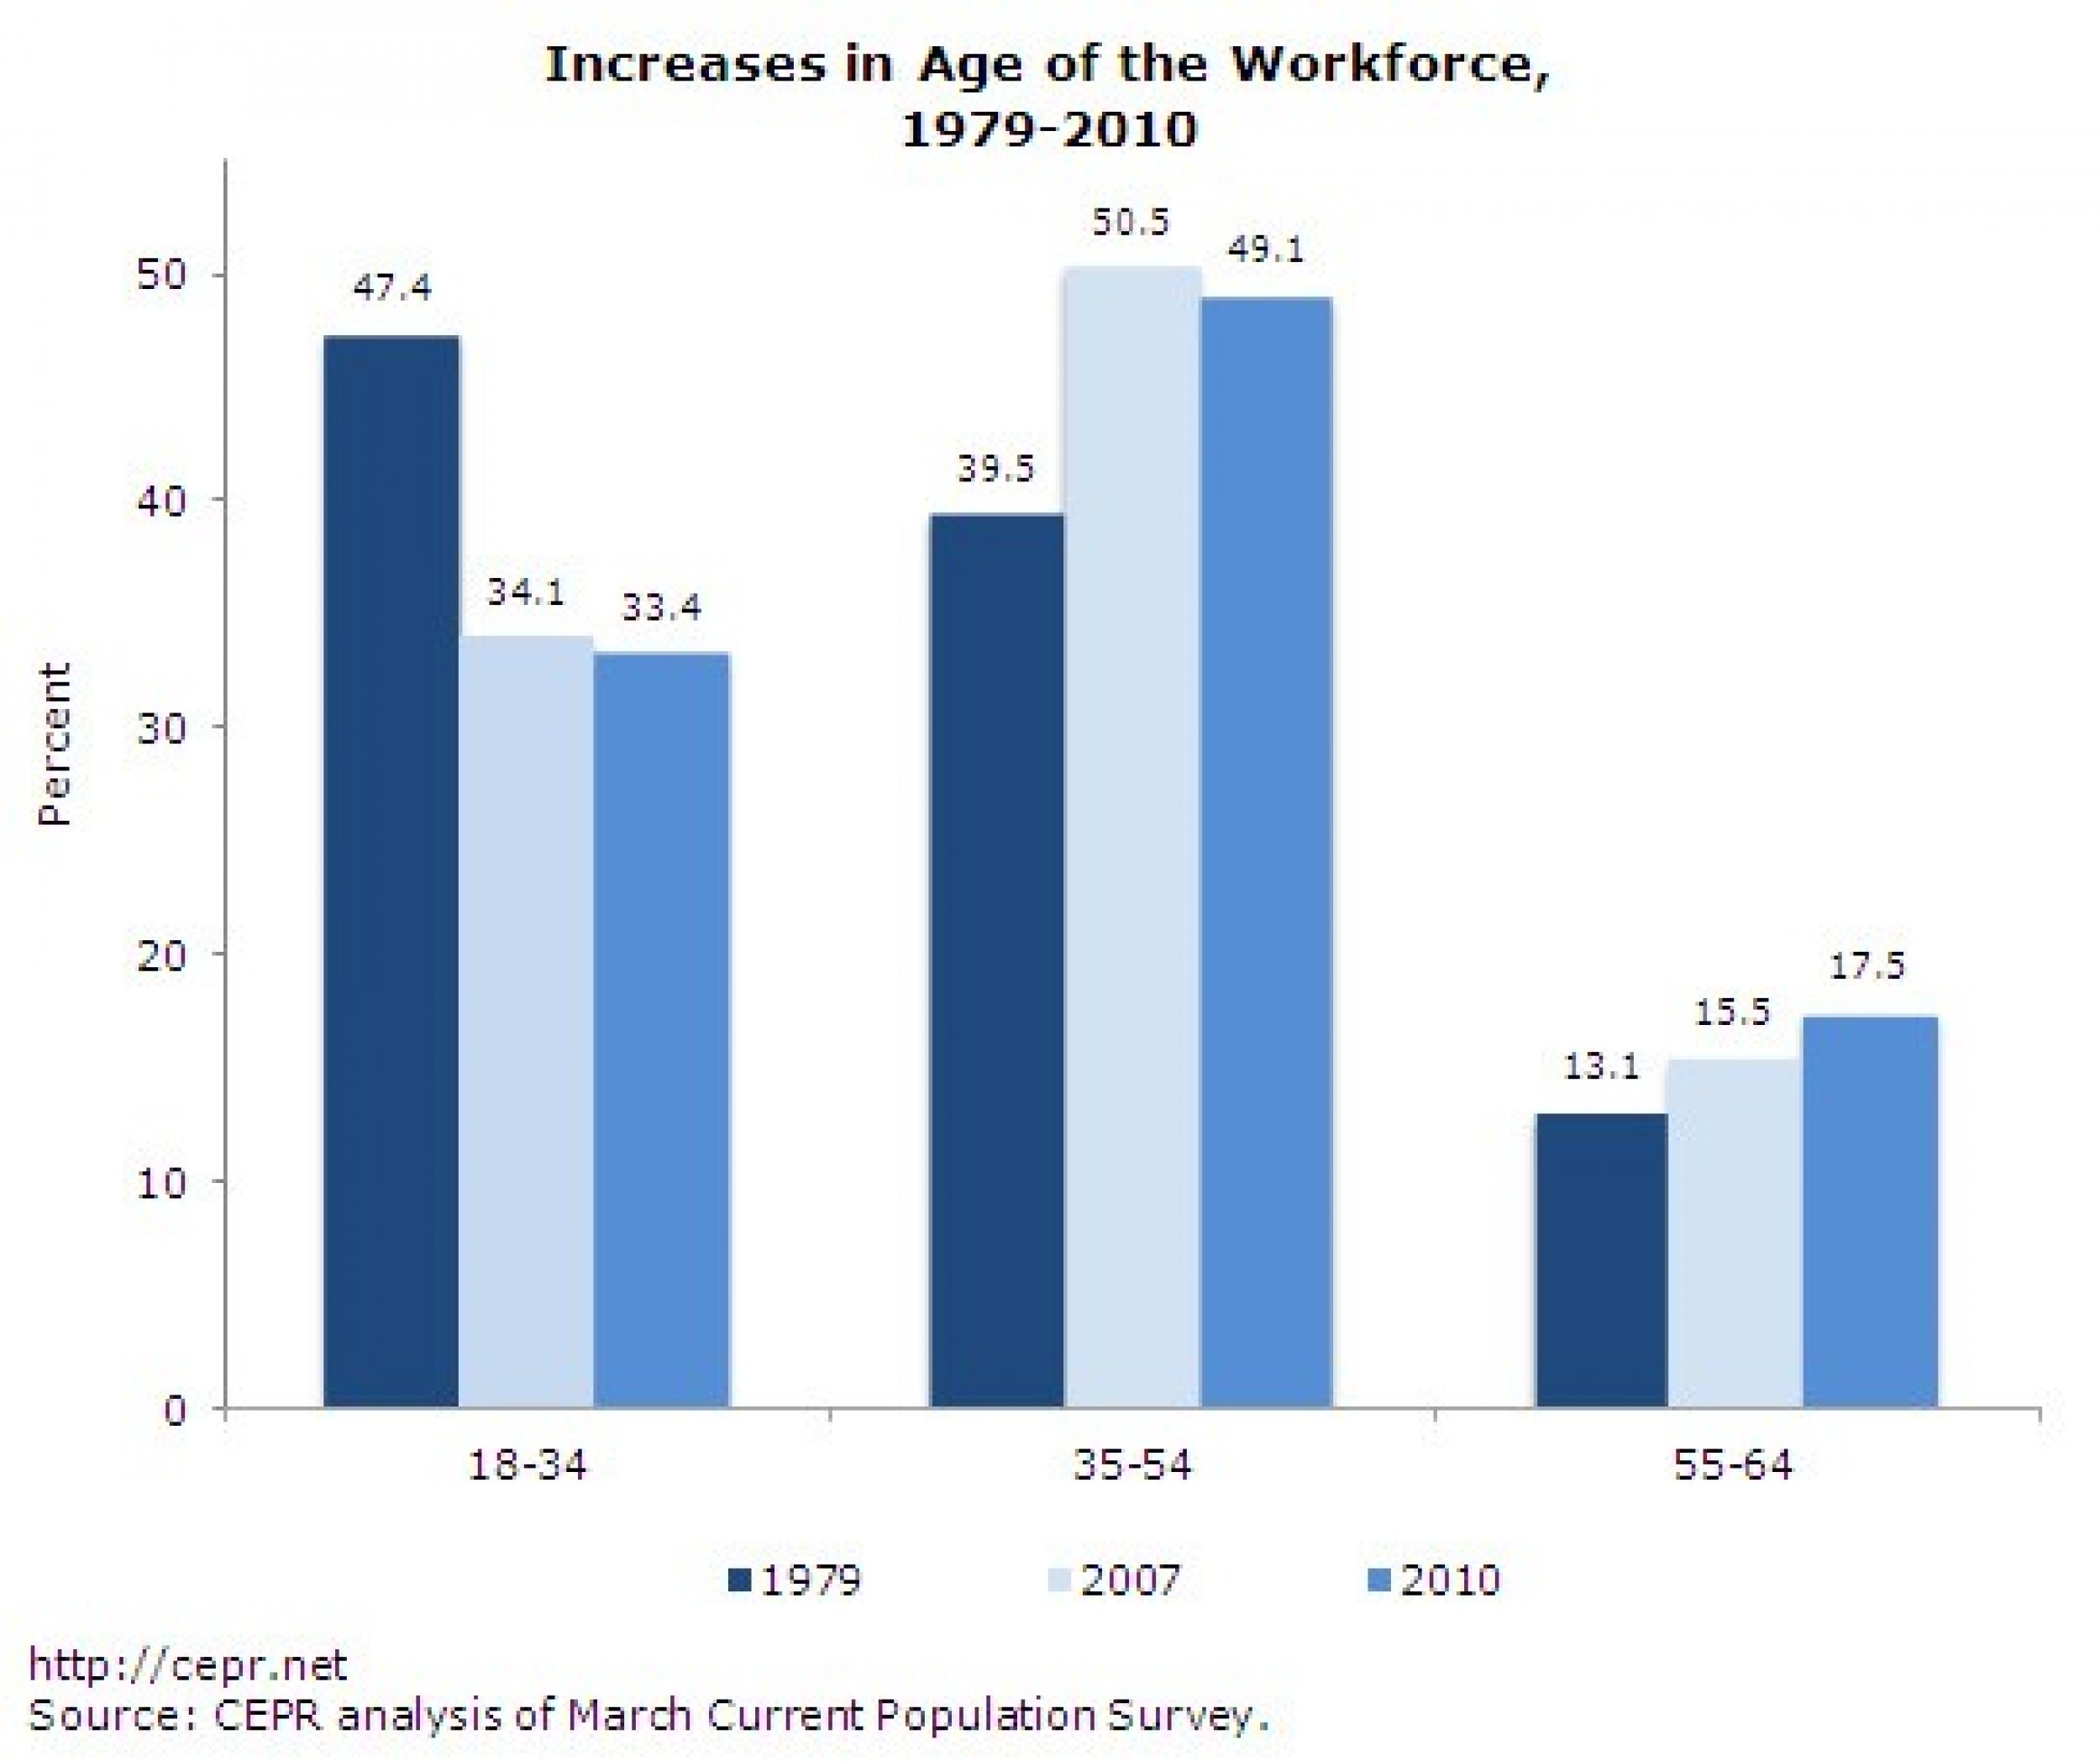 Increases in Age of the Workforce, 1979-2010